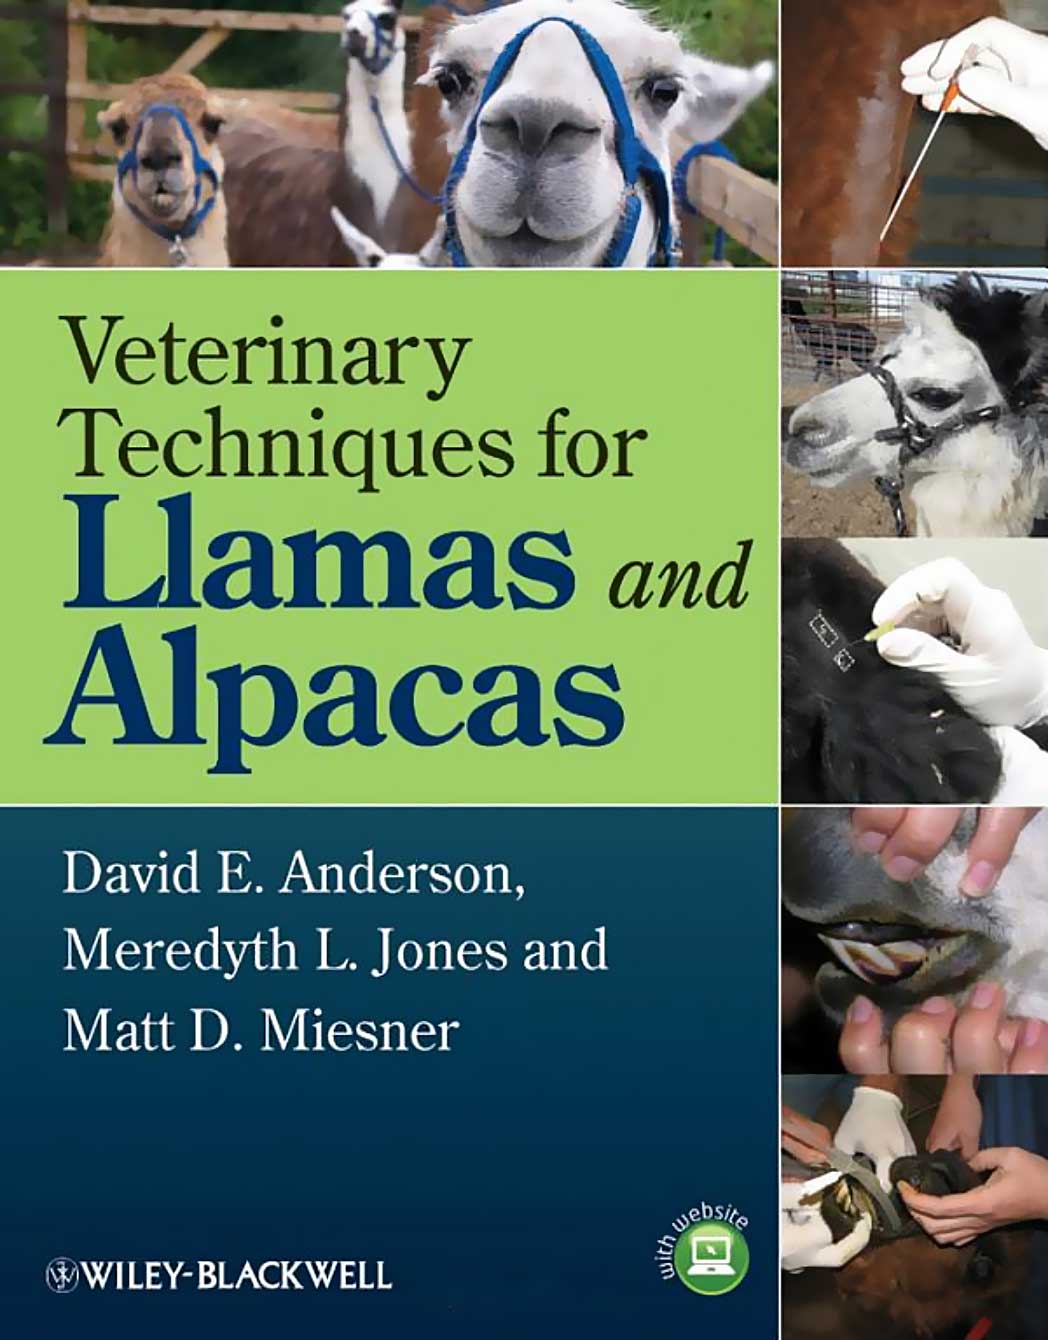 Veterinary Techniques for Llamas and Alpacas. Purchase on Amazon.